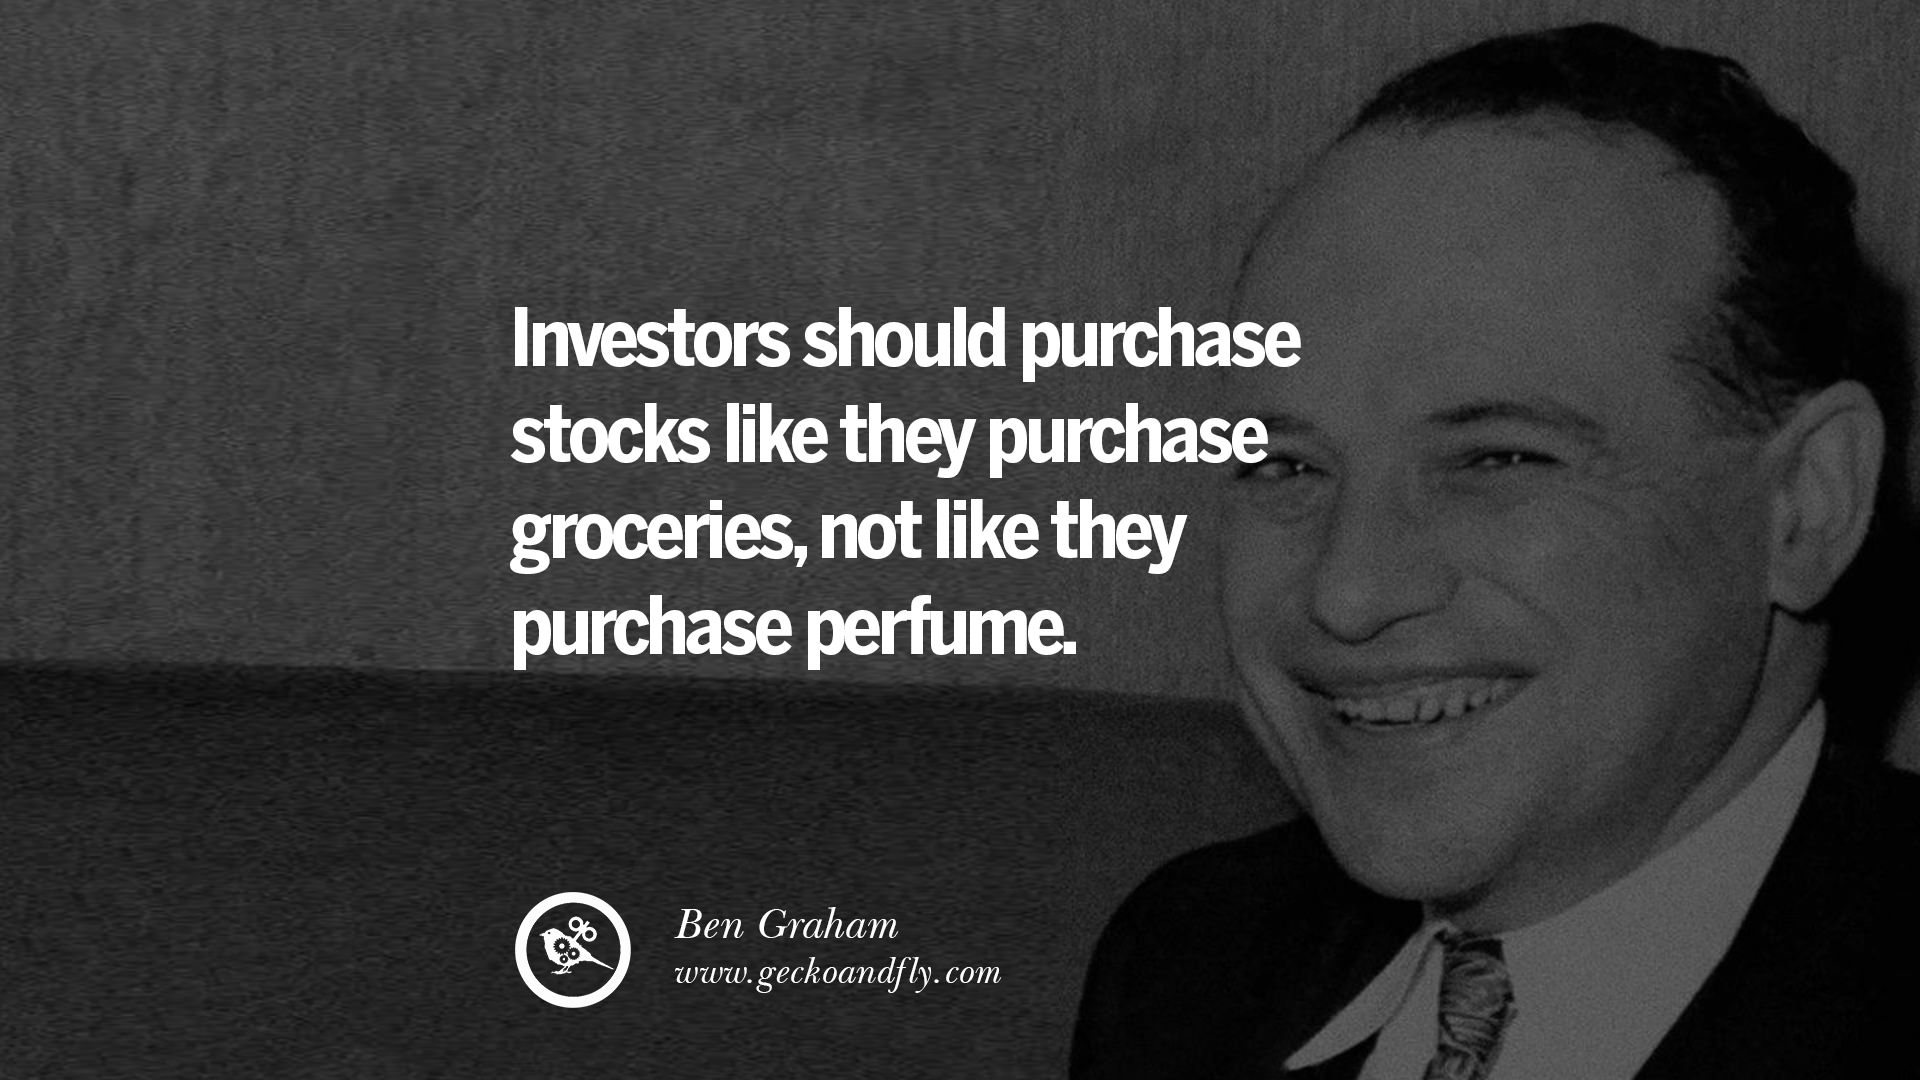 20 Inspiring Stock Market Investment Quotes by Successful Investors